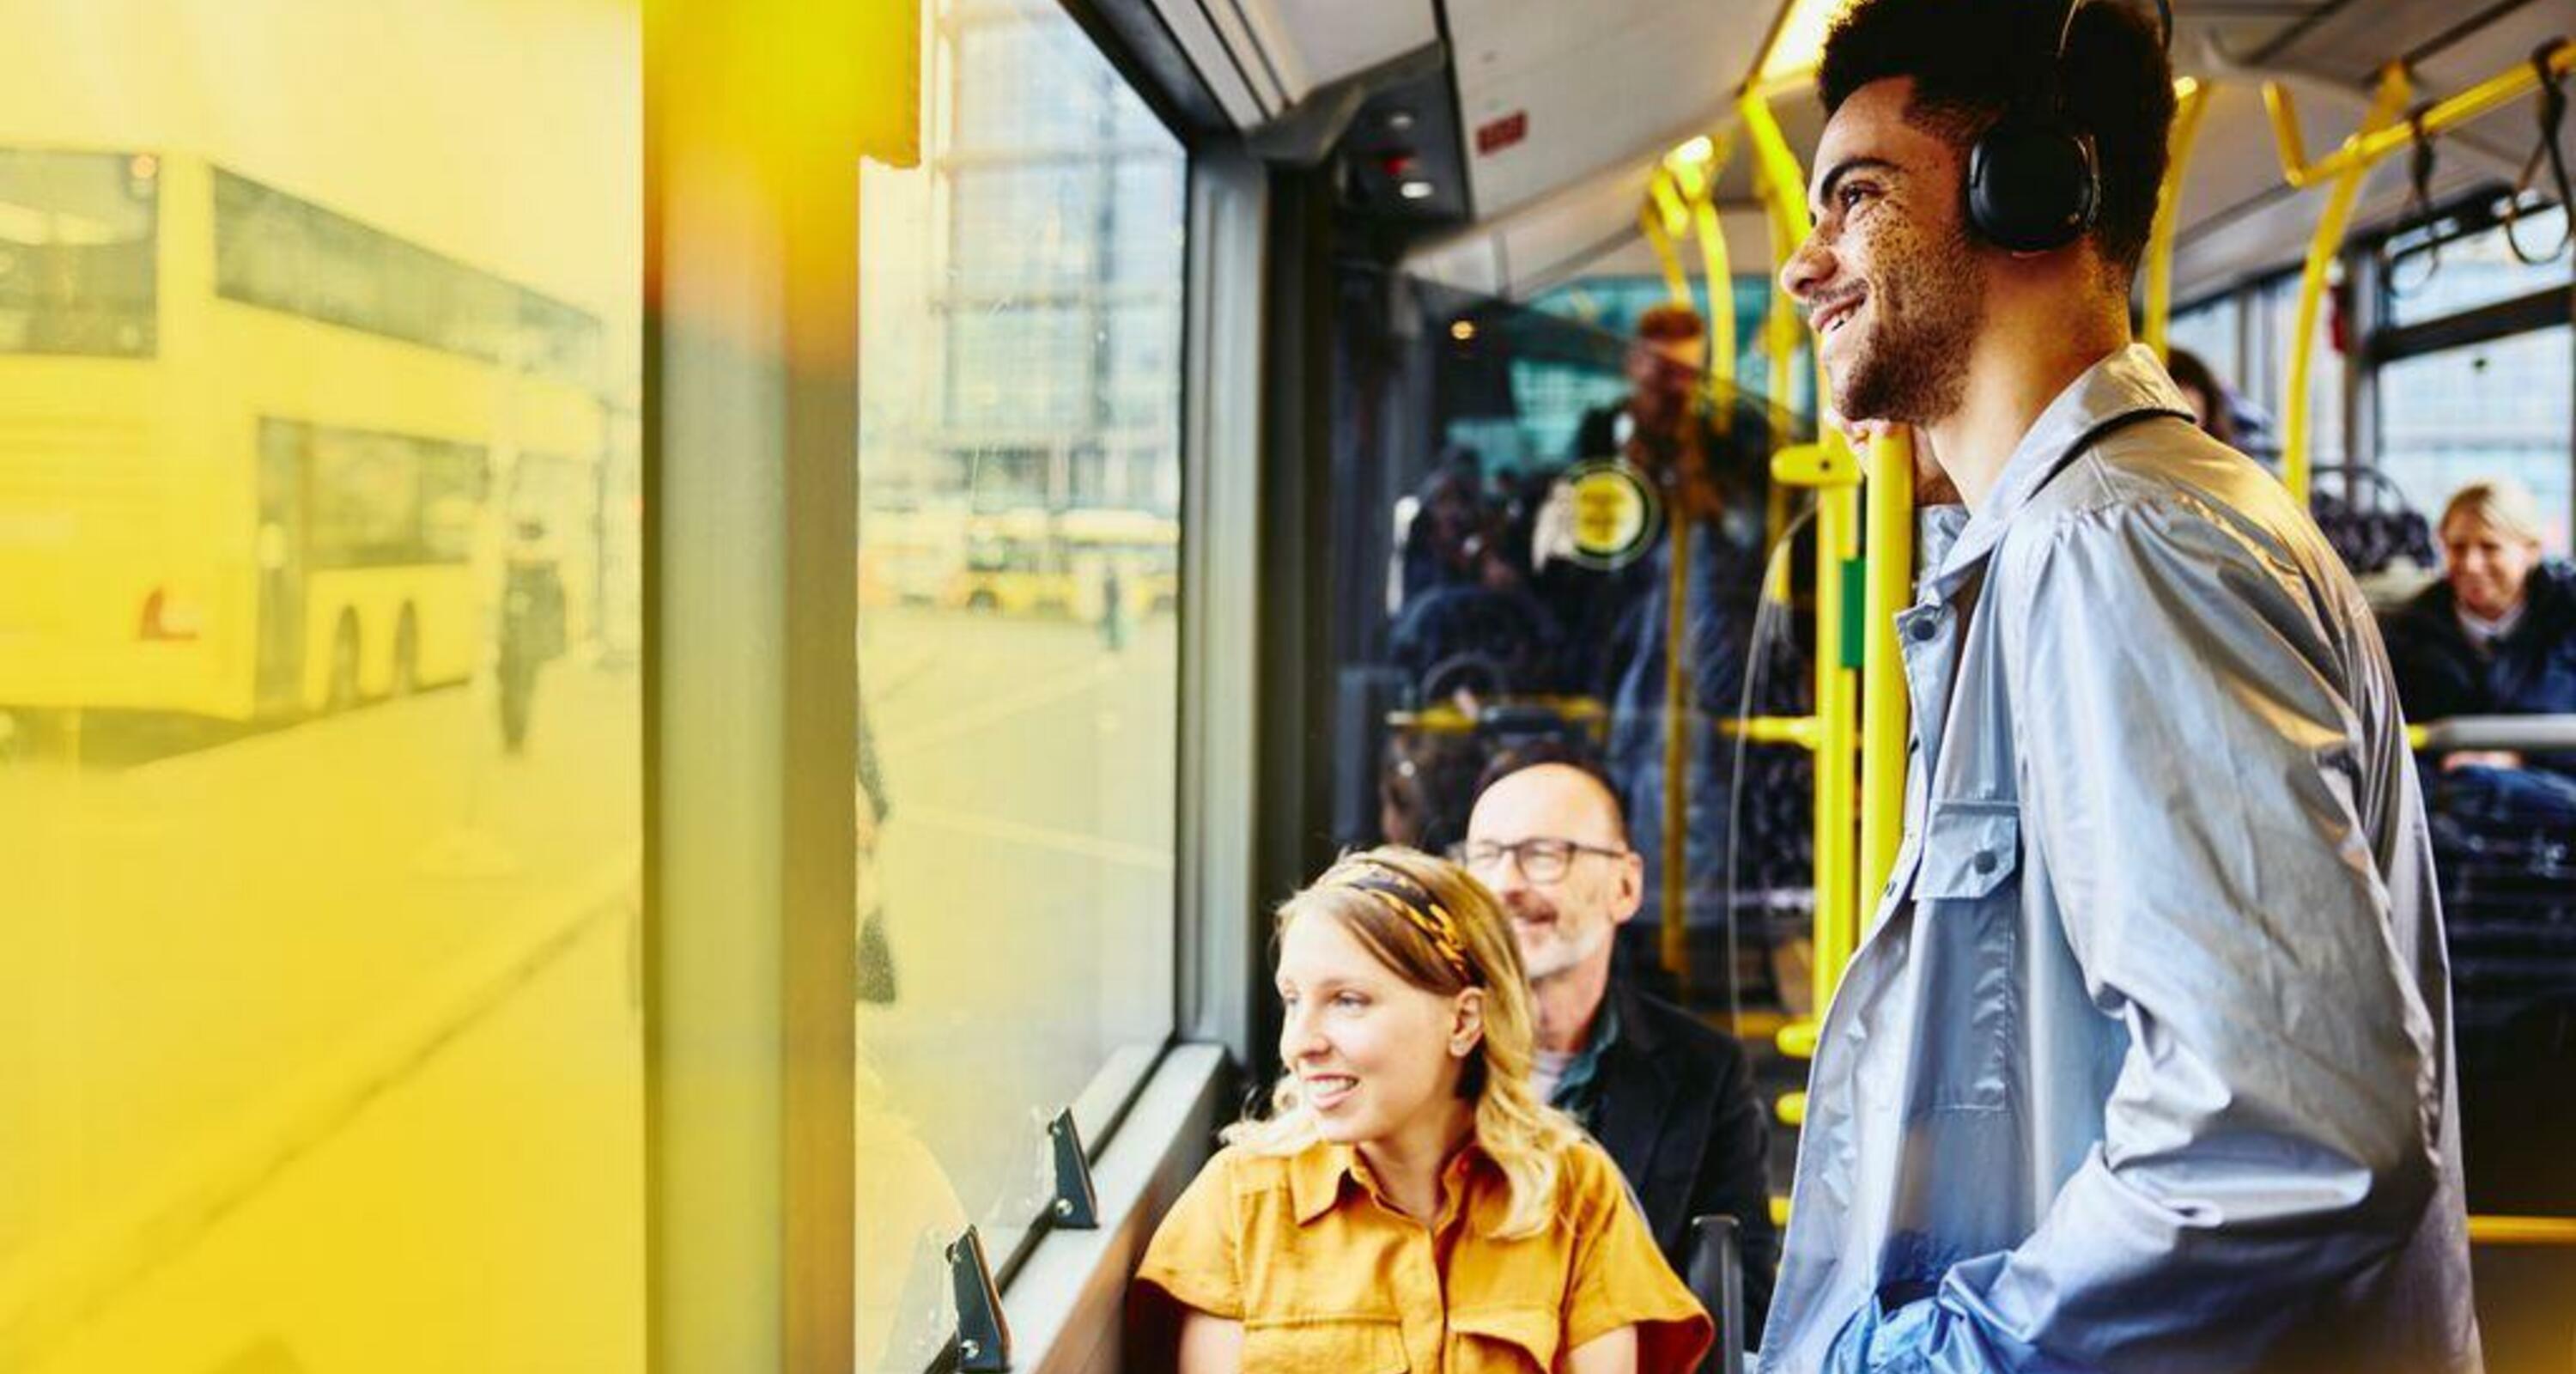 people riding the bus and smiling